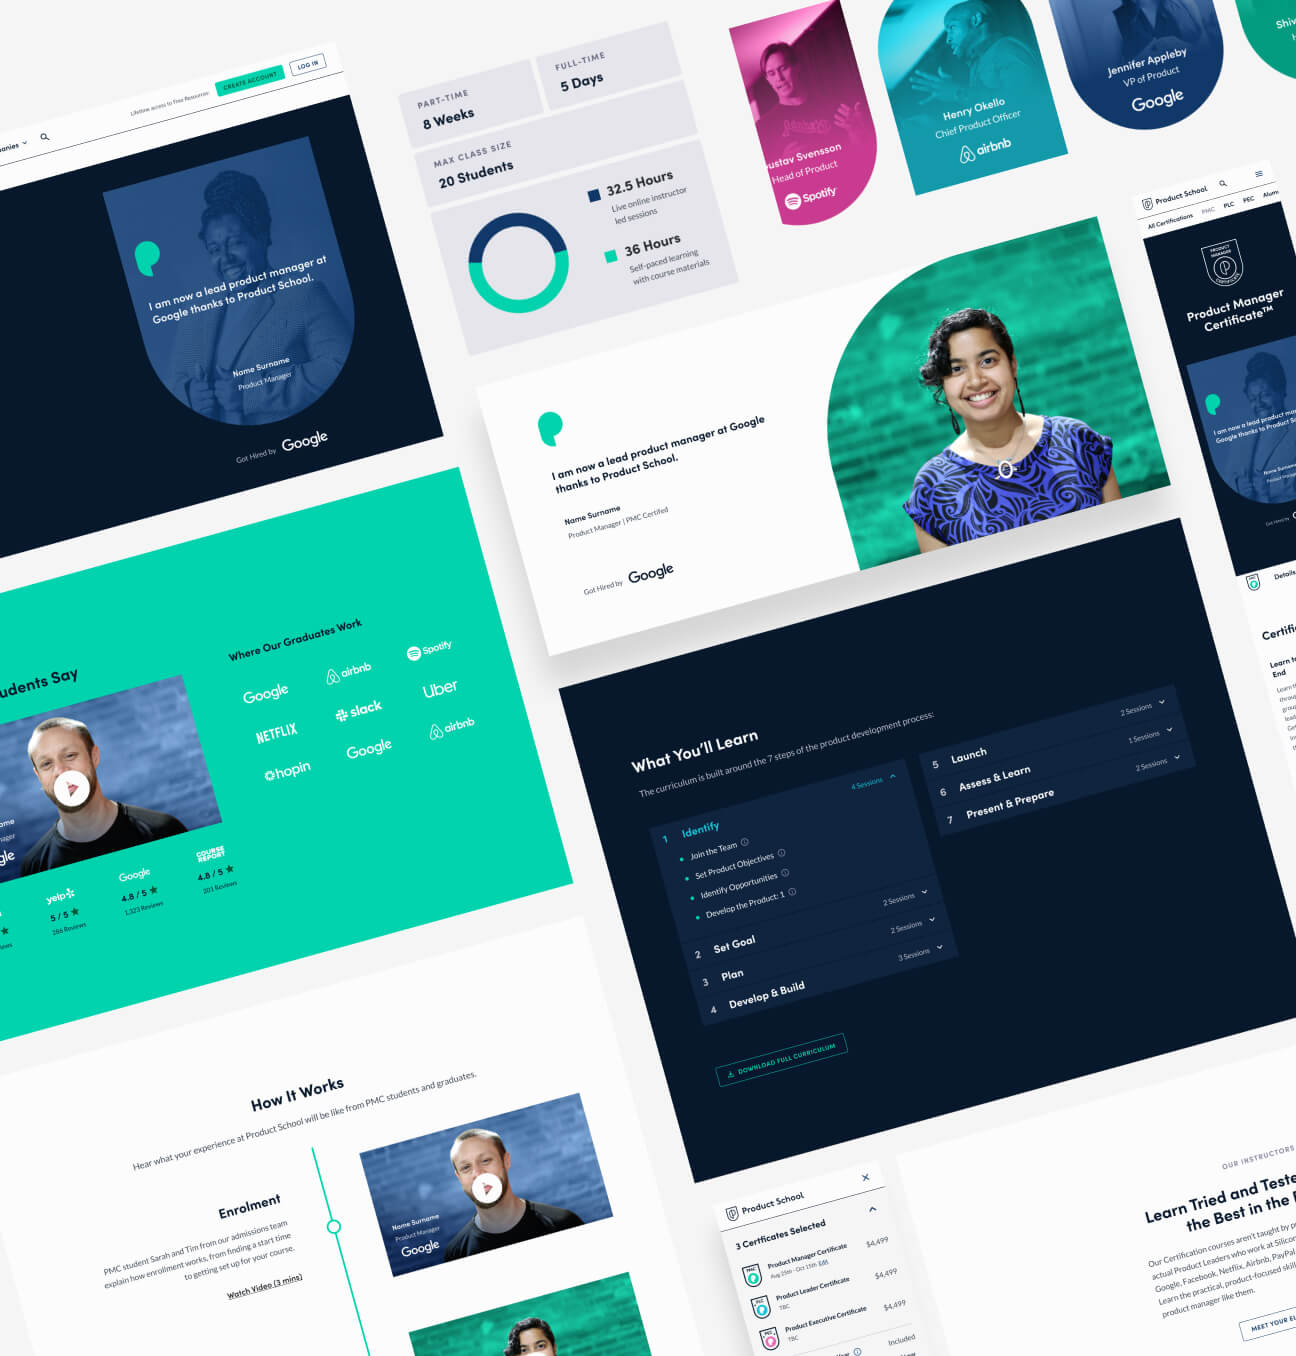 Selection of elements from the Product school design system